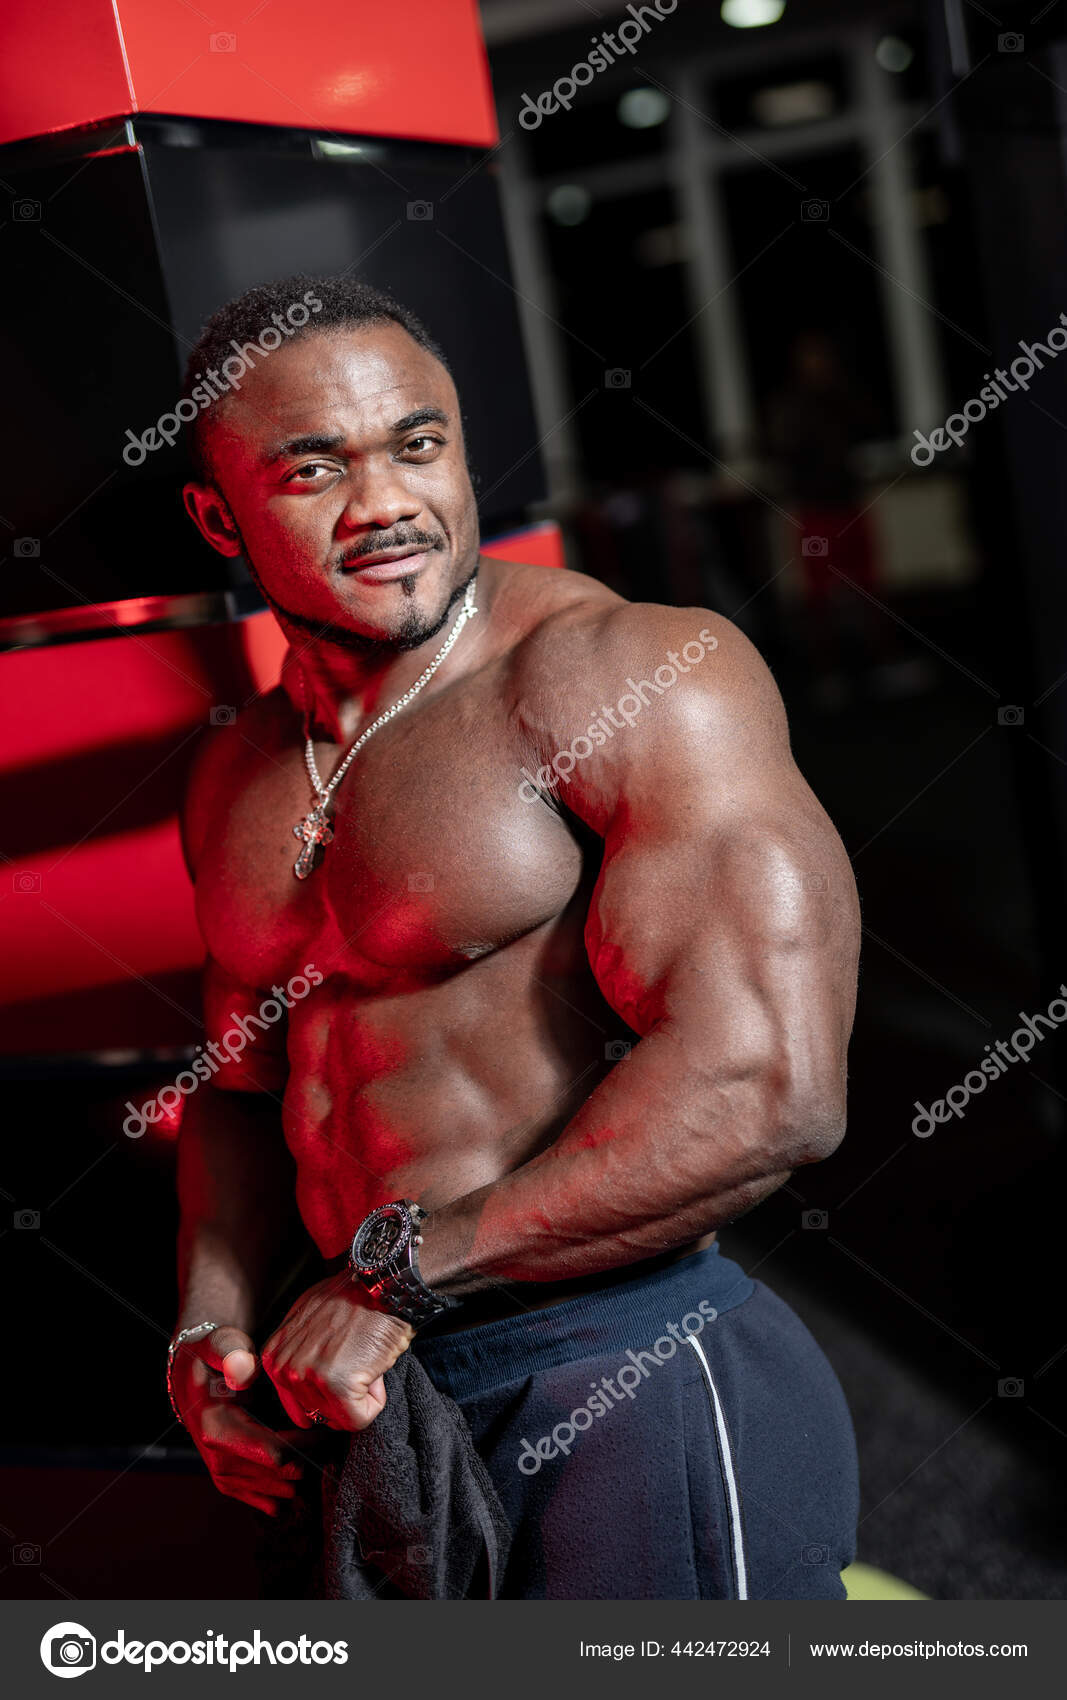 Portrait Of A Young Man Posing Bodybuilding Poses In Modern Fitness Center  Stock Photo, Picture and Royalty Free Image. Image 93606832.